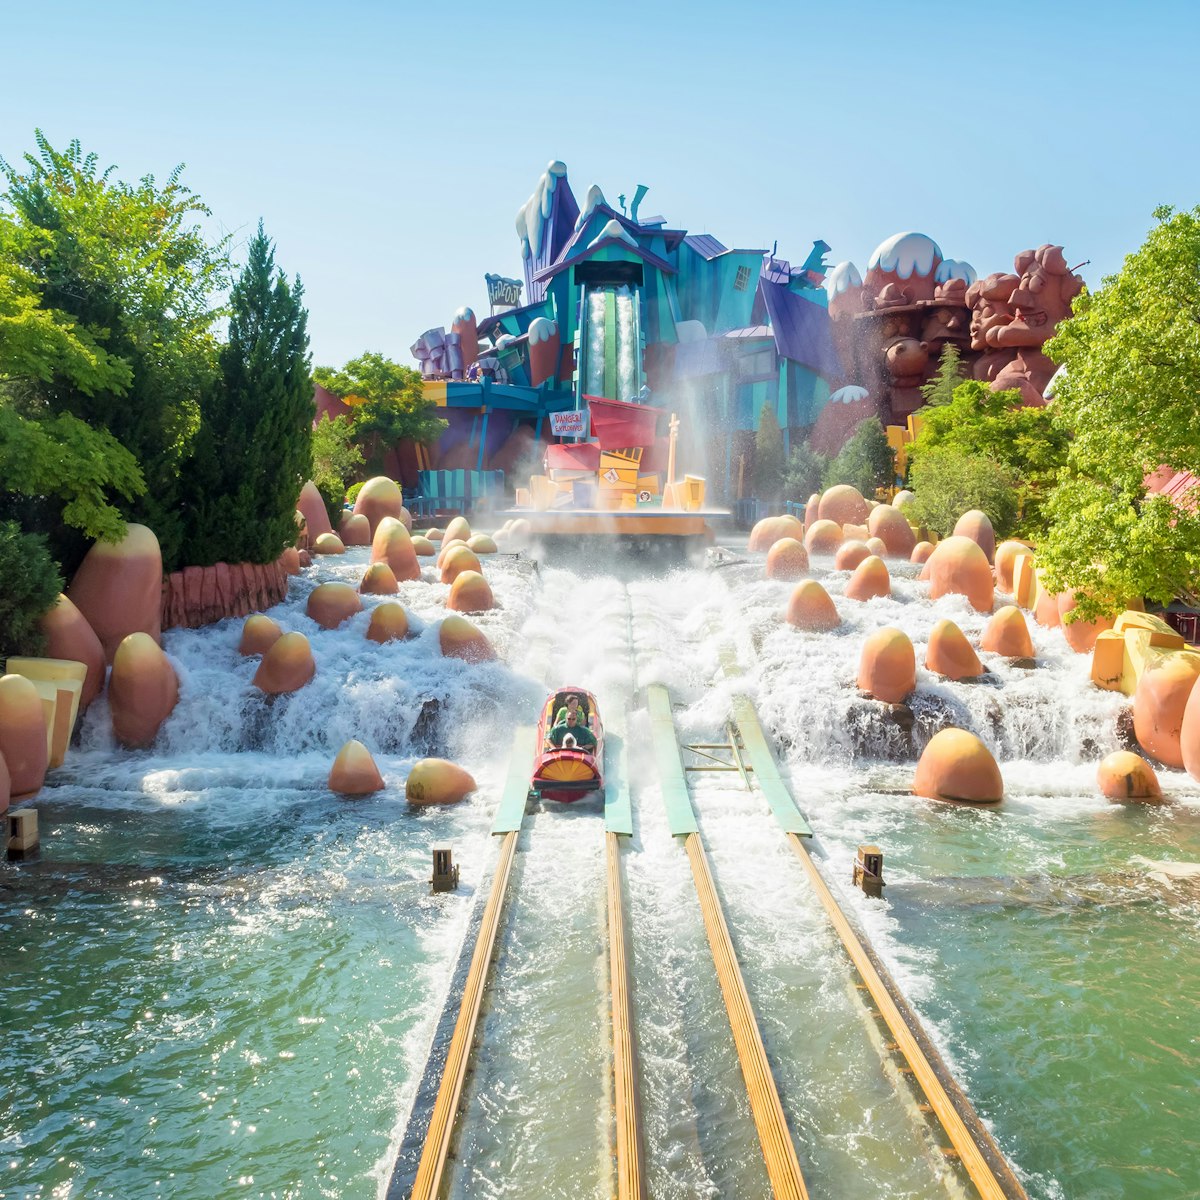 The Dudley Do-Right Ripsaw Falls ride at Universal Studios Islands of Adventure theme park.